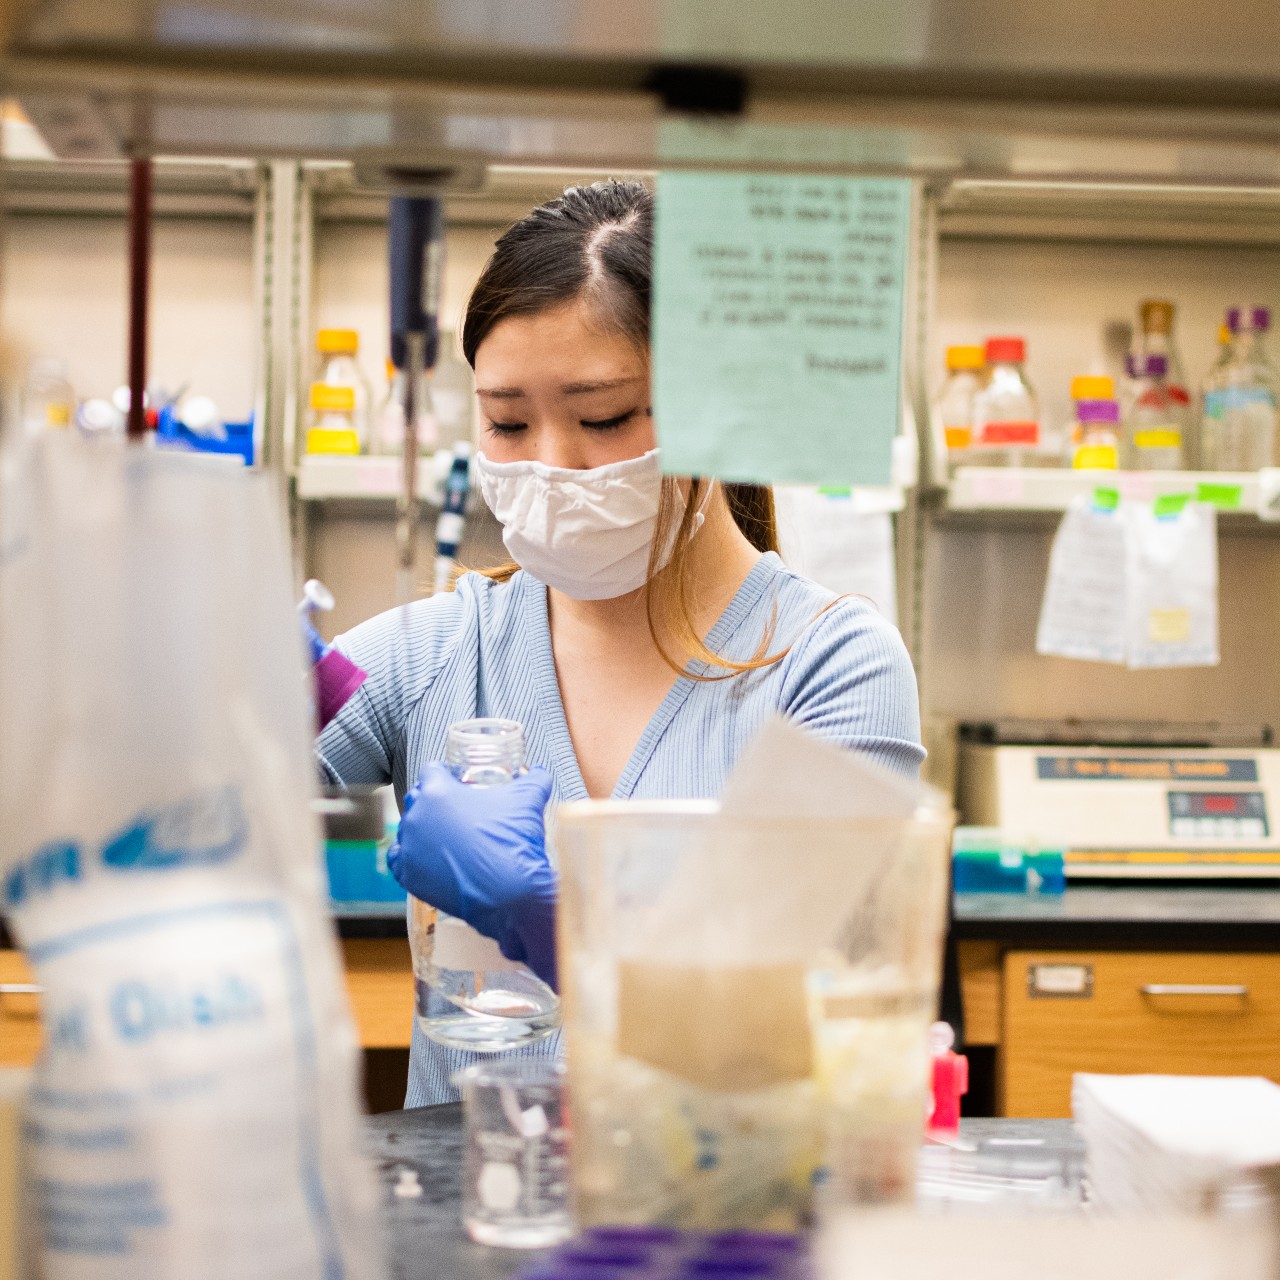 Riri Yoza '23 conducts research during the 2021 summer research period.